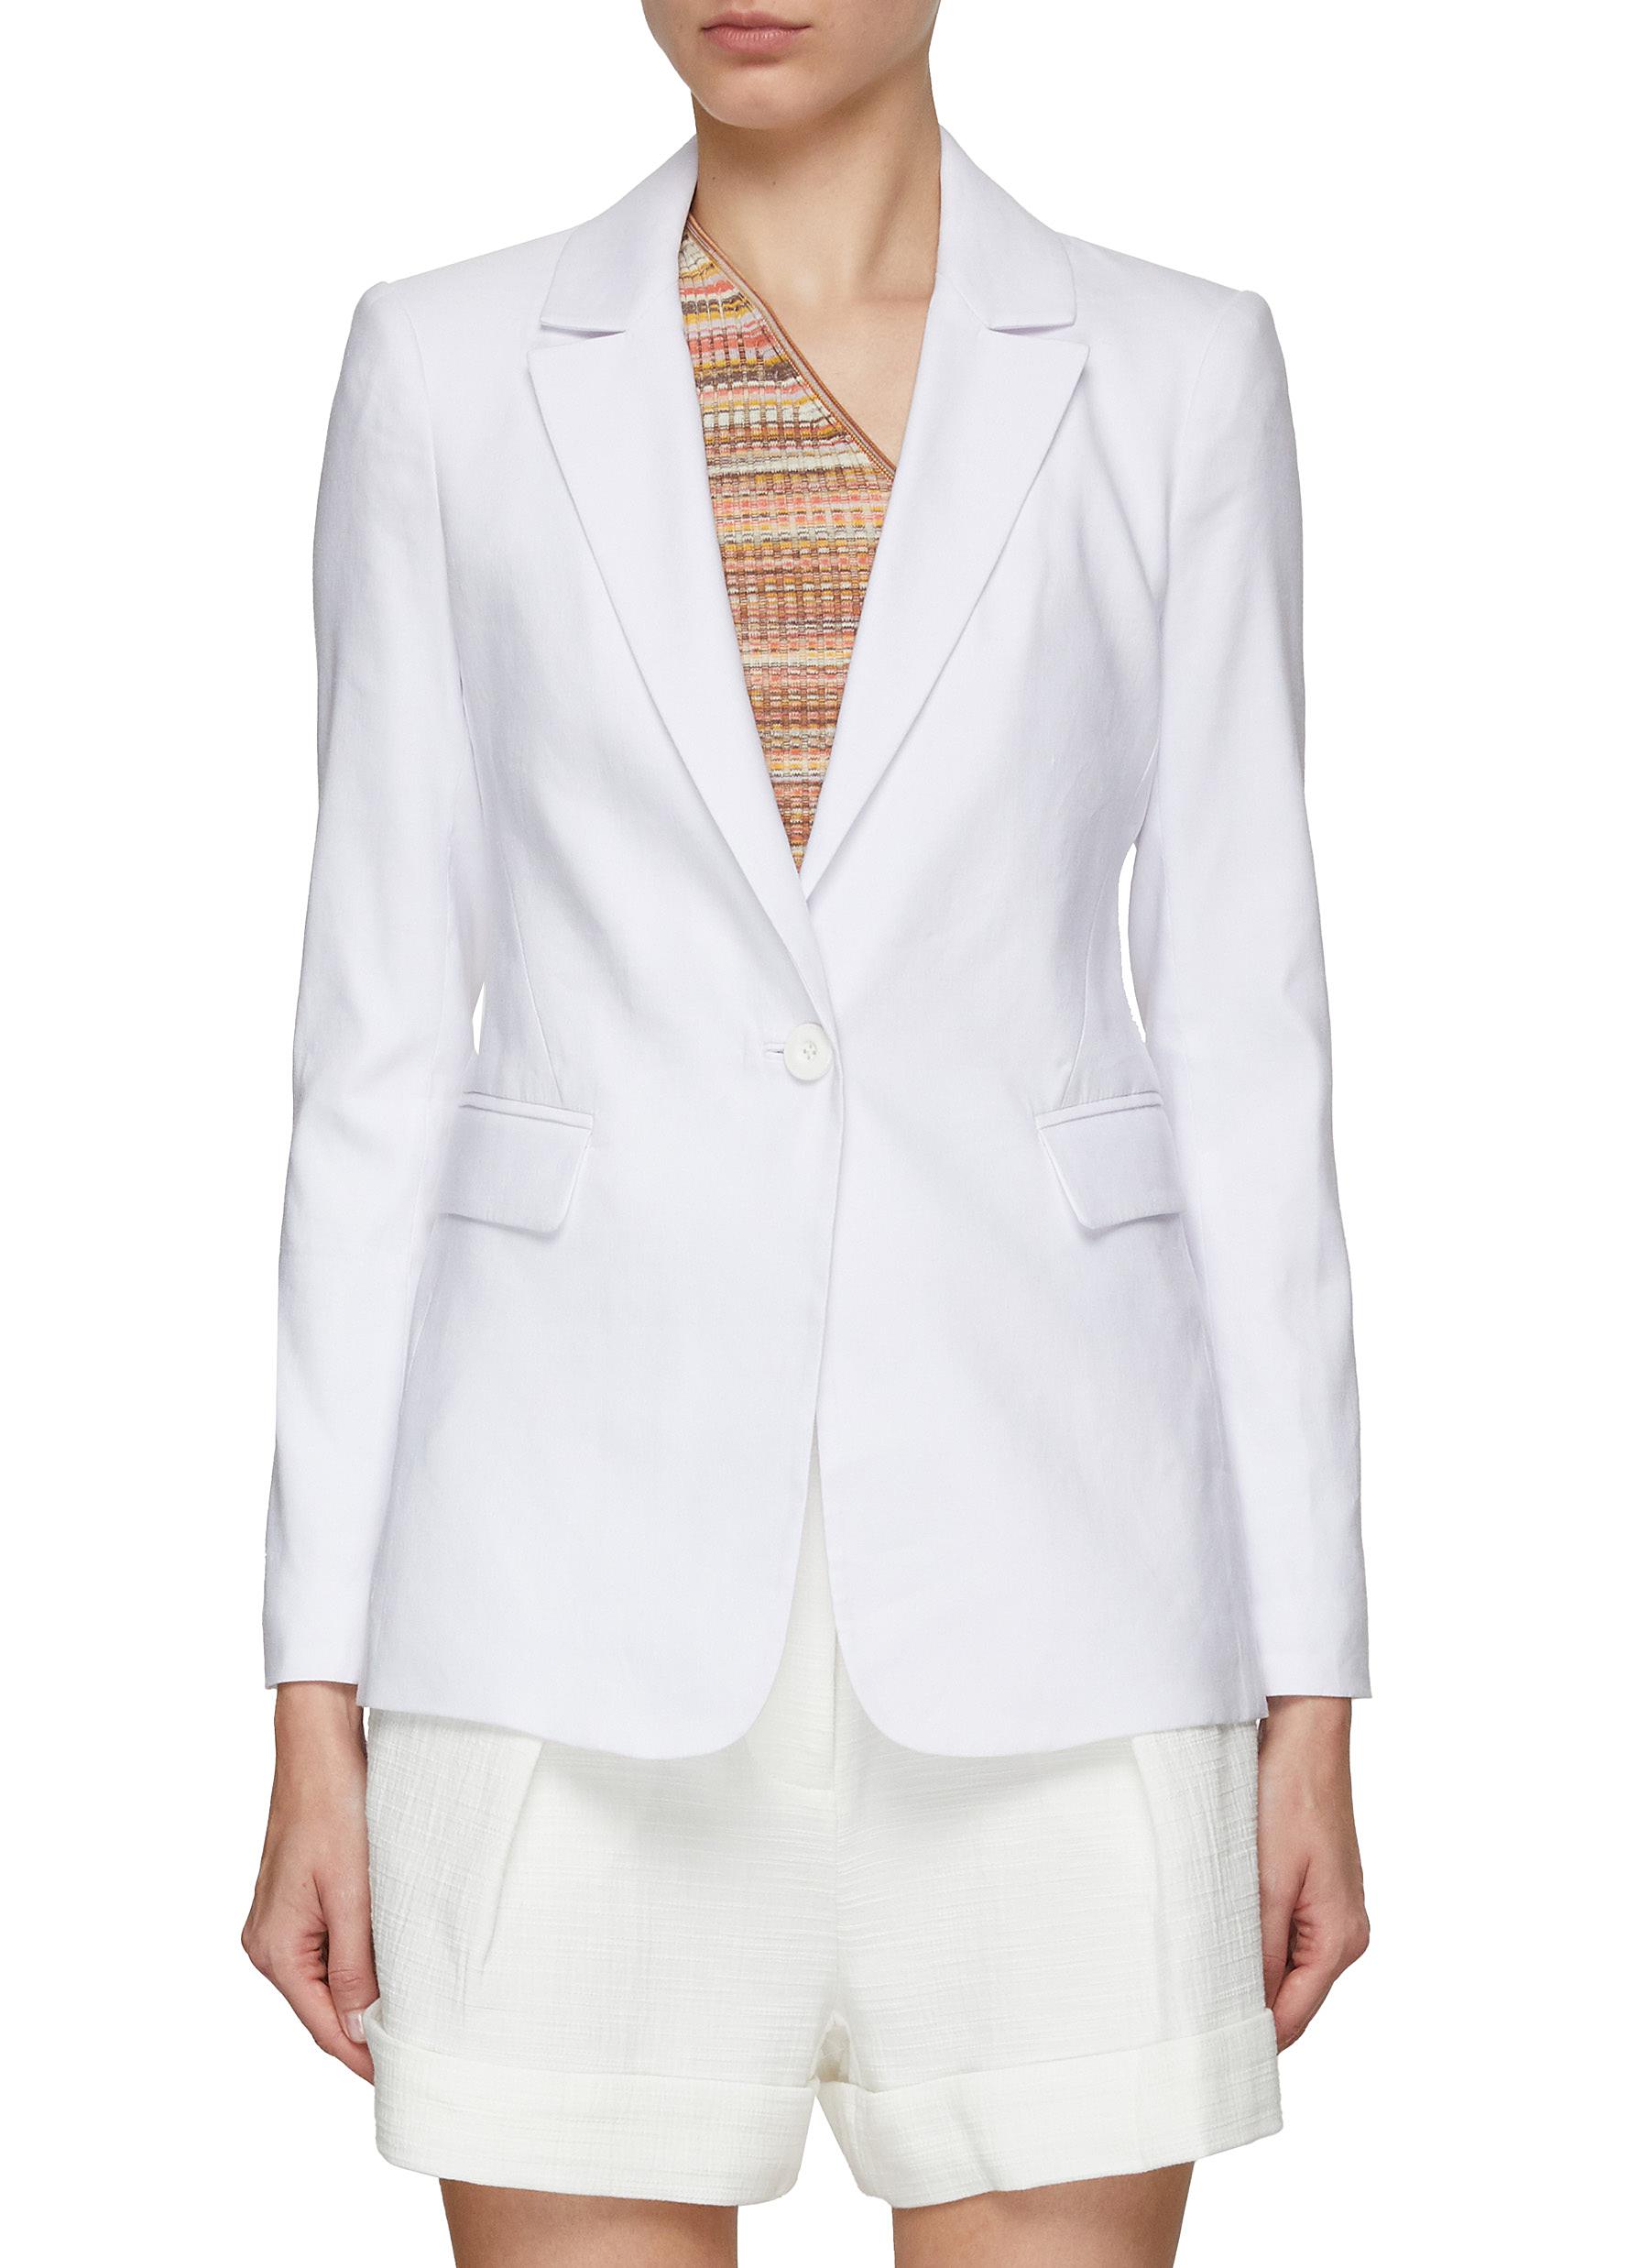 Macey Single Breasted Notched Lapel Blazer